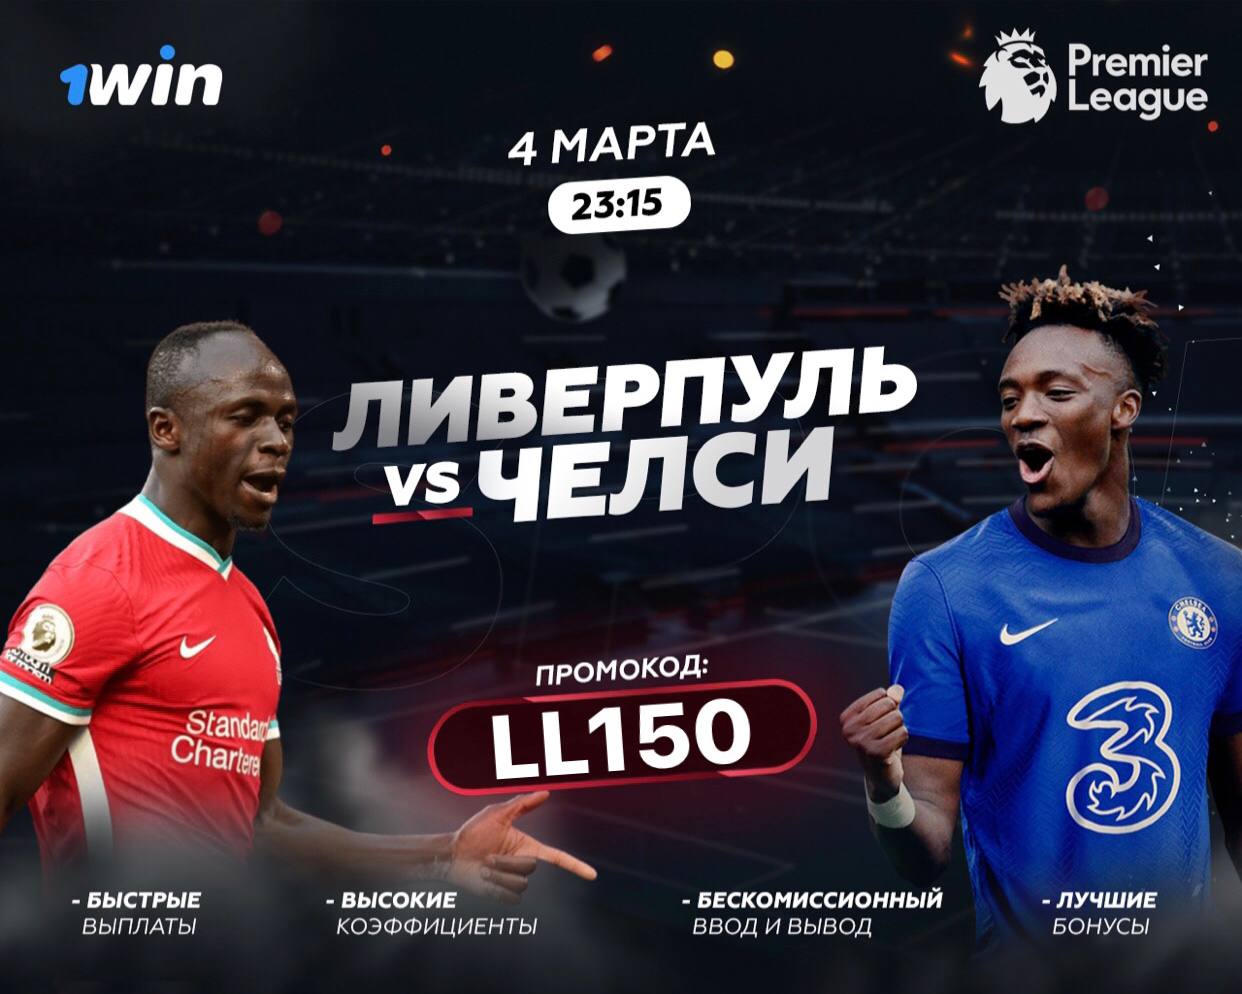 1win рабочее зеркало 1win ooo official26